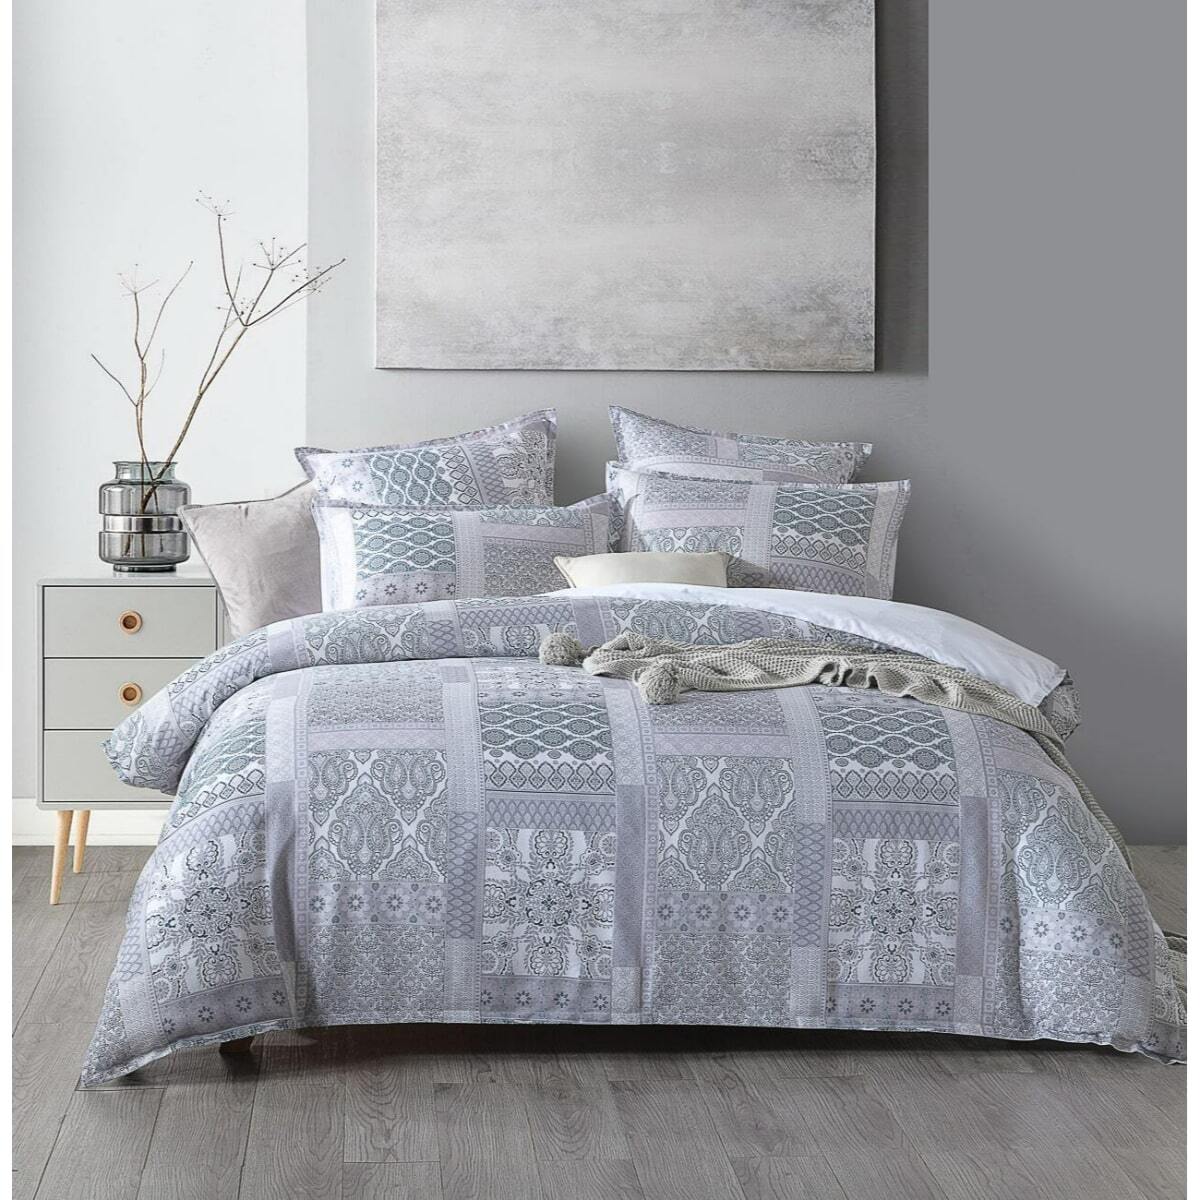 Delphini Quilt Cover Set [SIZE: King Bed]